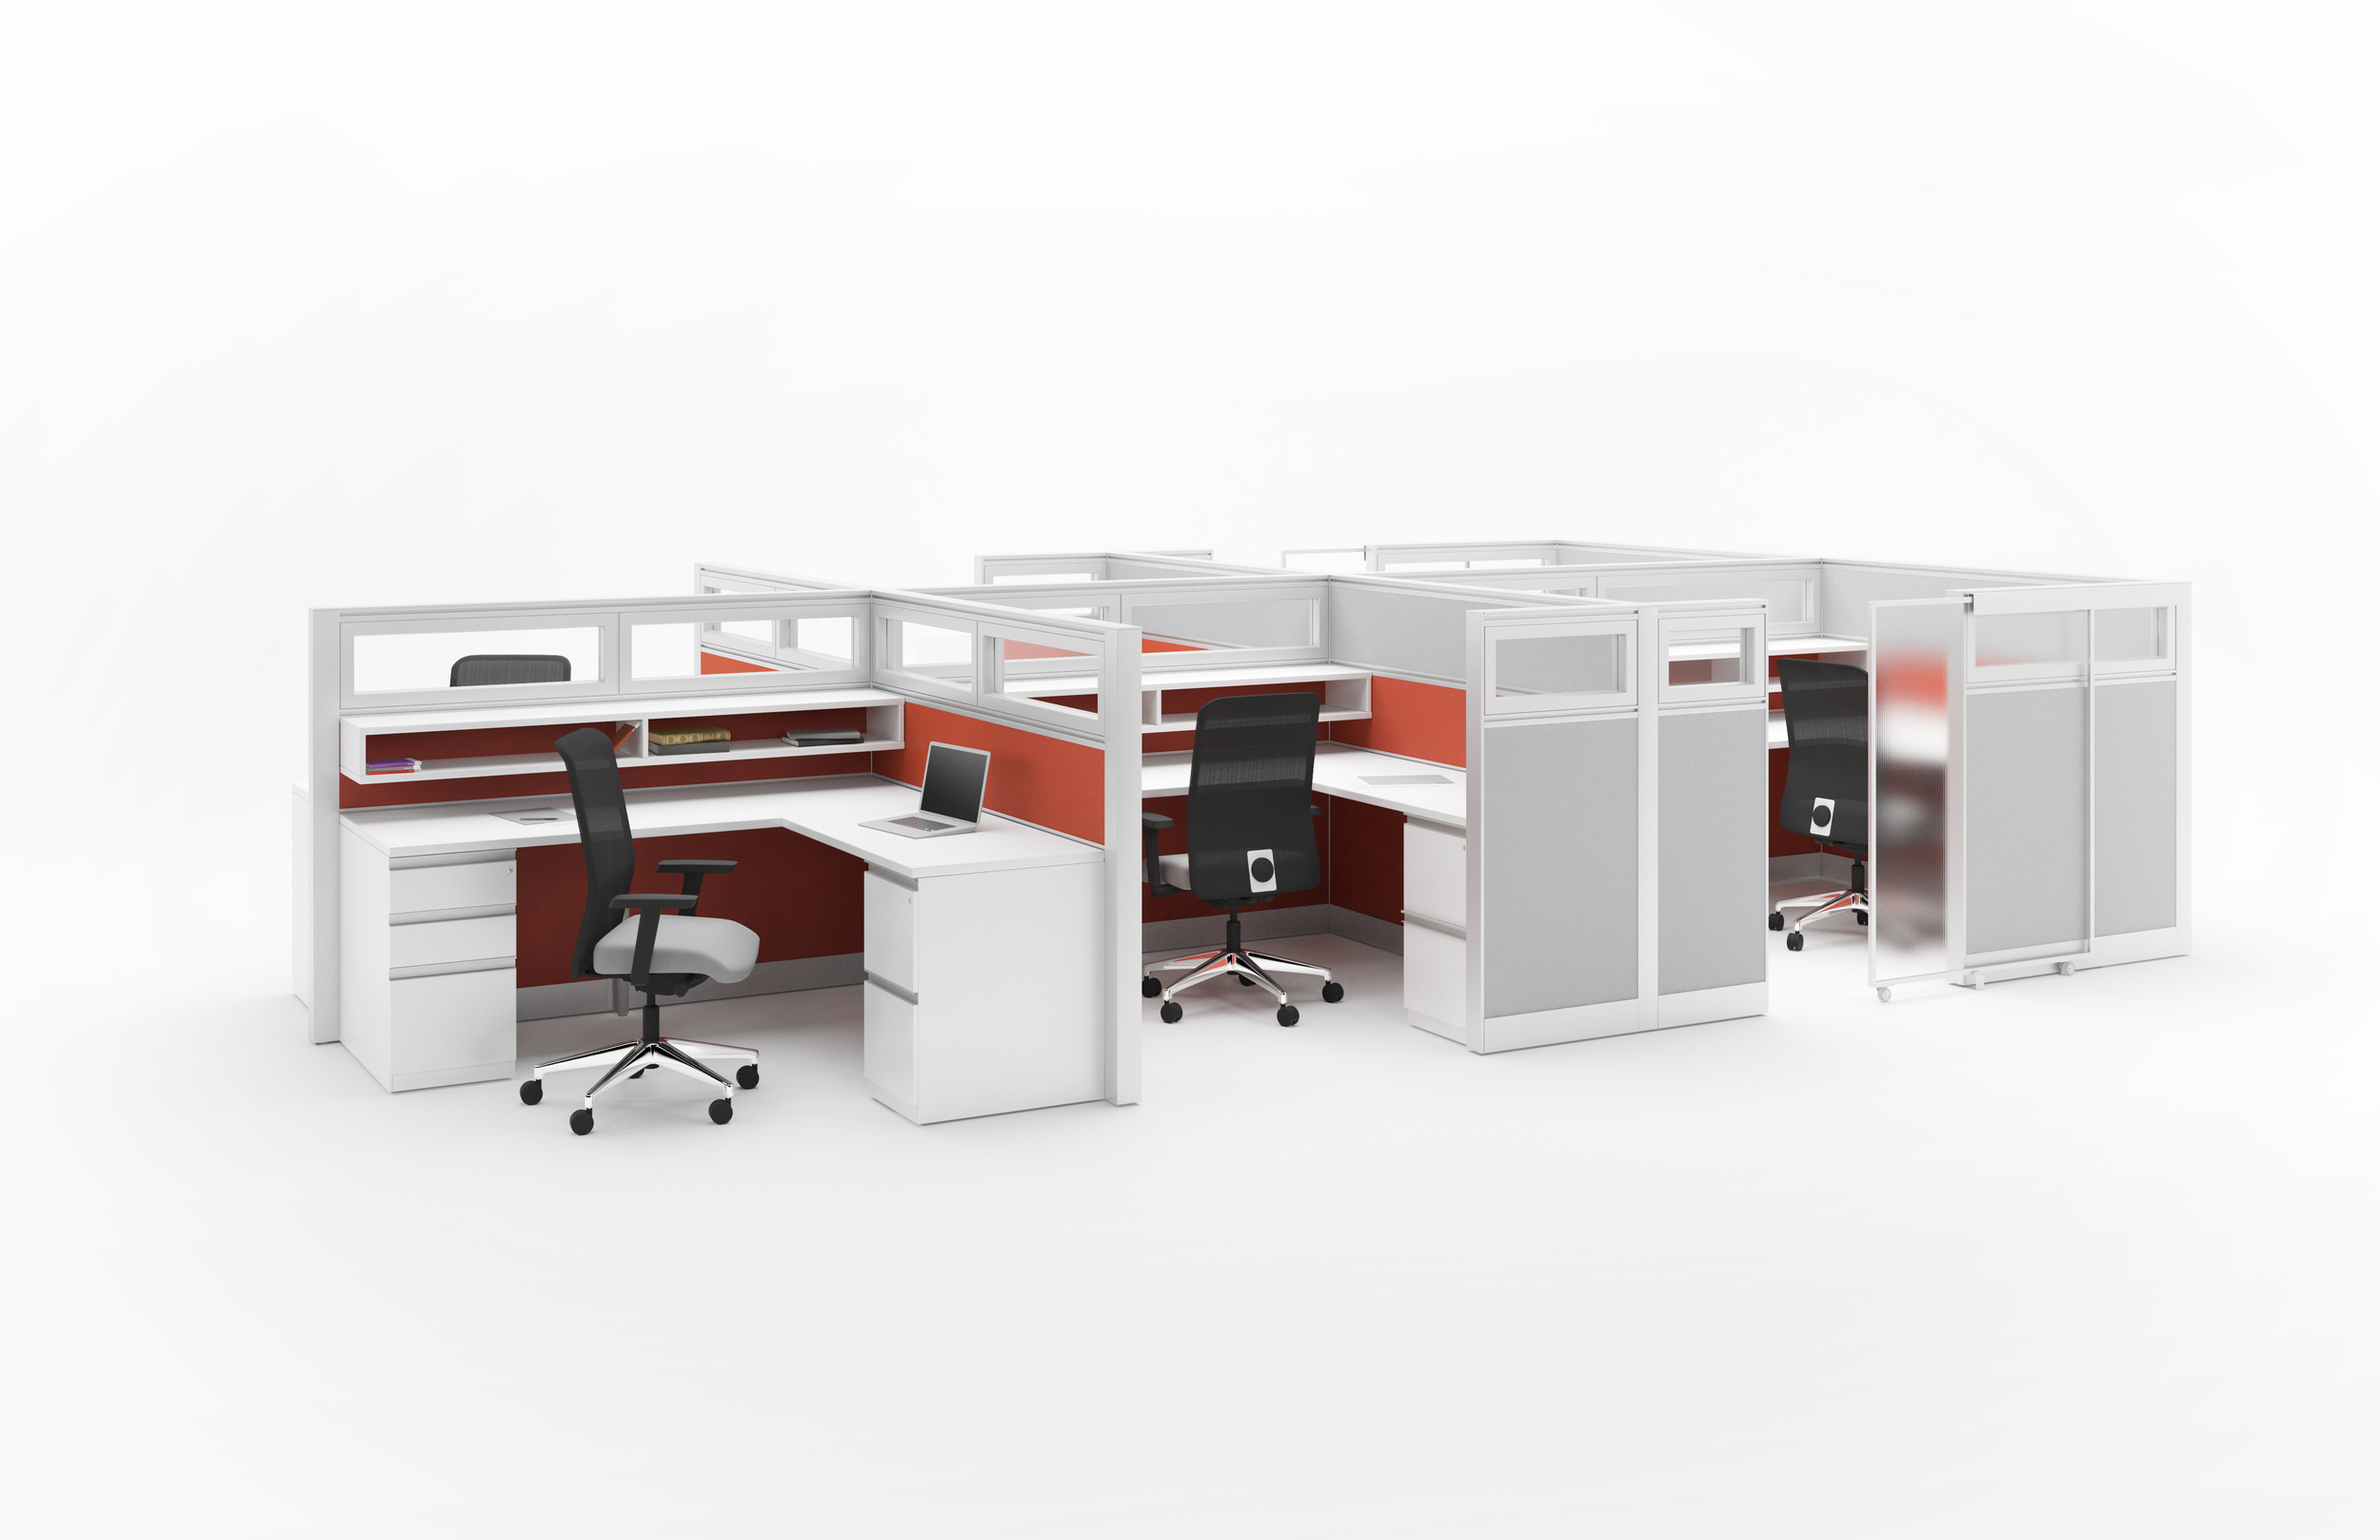  Xsite panels, Footprint surfaces, Metal filing and Campos seating 